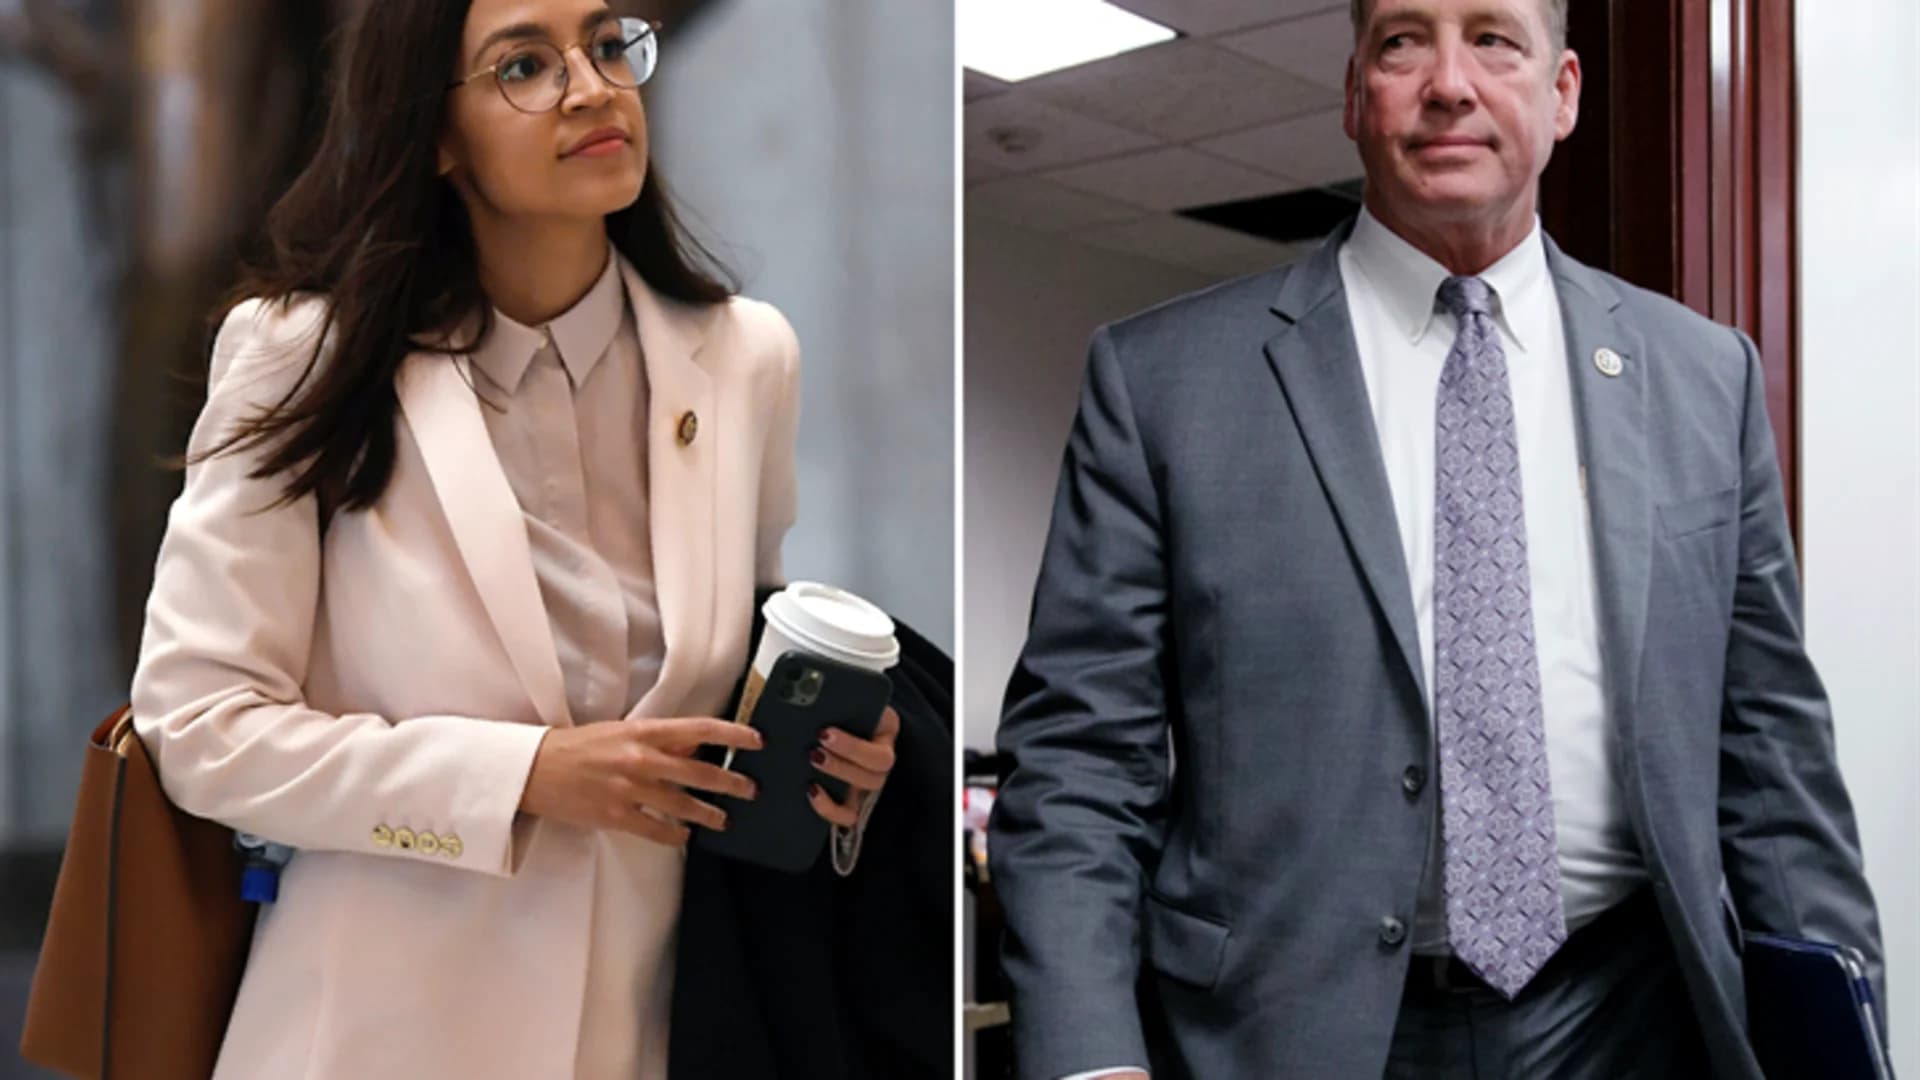 AOC, House Dems call out abusive treatment by men after Capitol steps confrontation